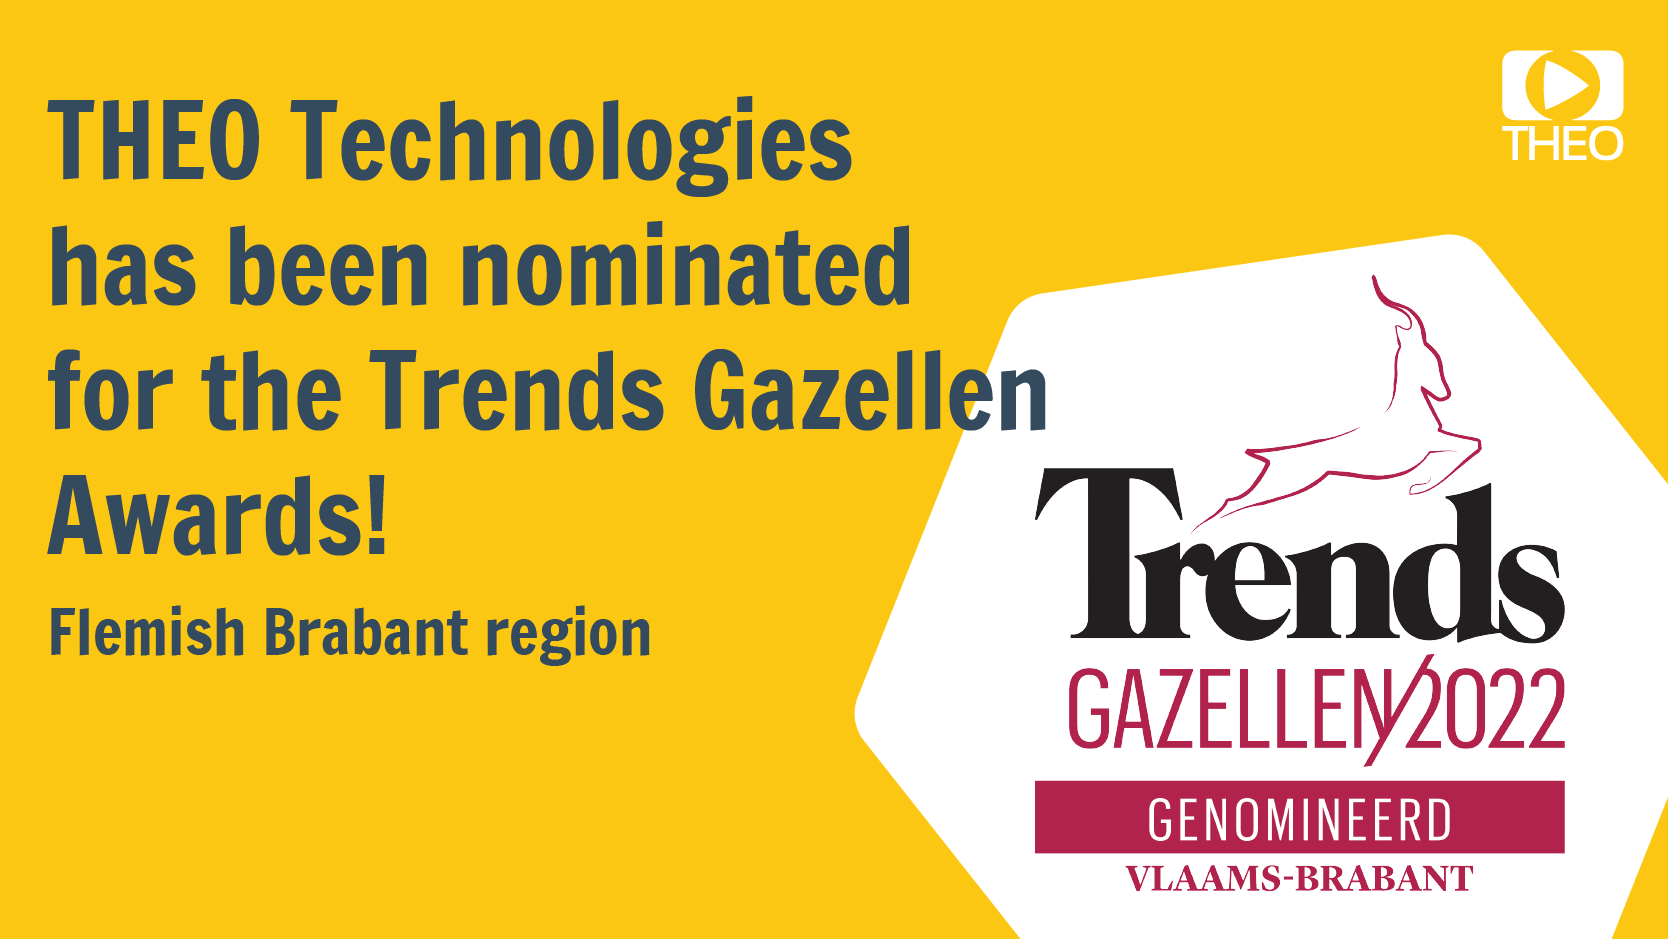 THEO Technologies is nominated for the 2022 Trends Gazellen Award!